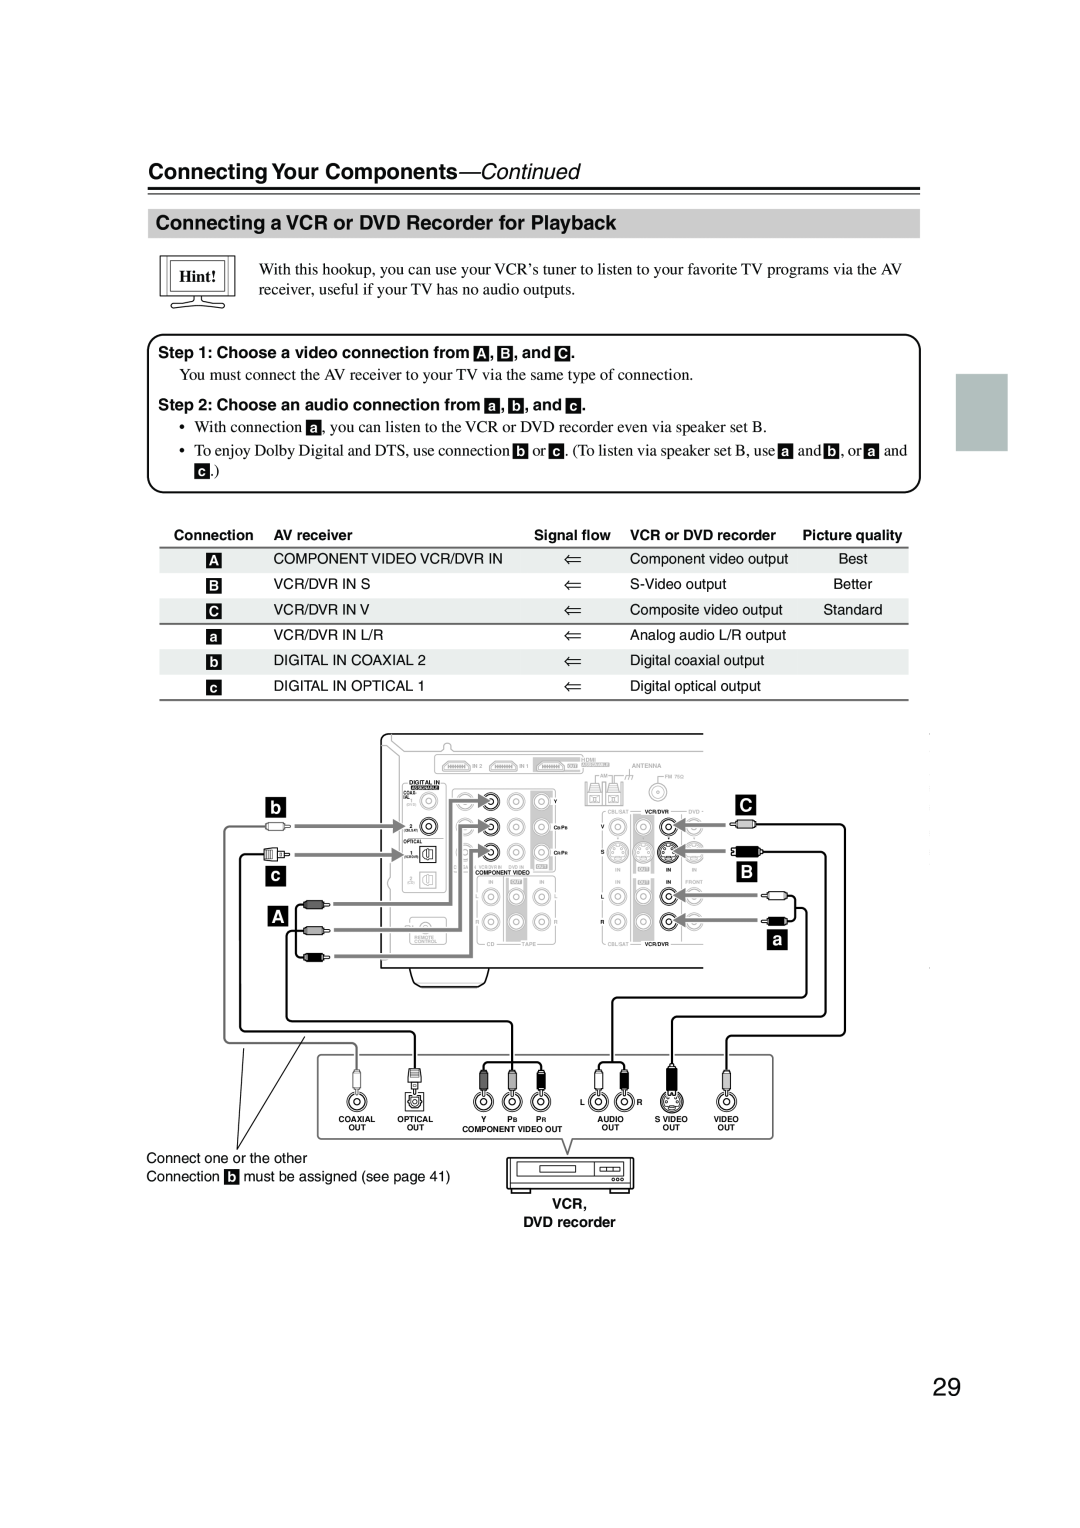 Onkyo HT-SP904 instruction manual Connecting a VCR or DVD Recorder for Playback, Connecting Your Components—Continued, Hint 